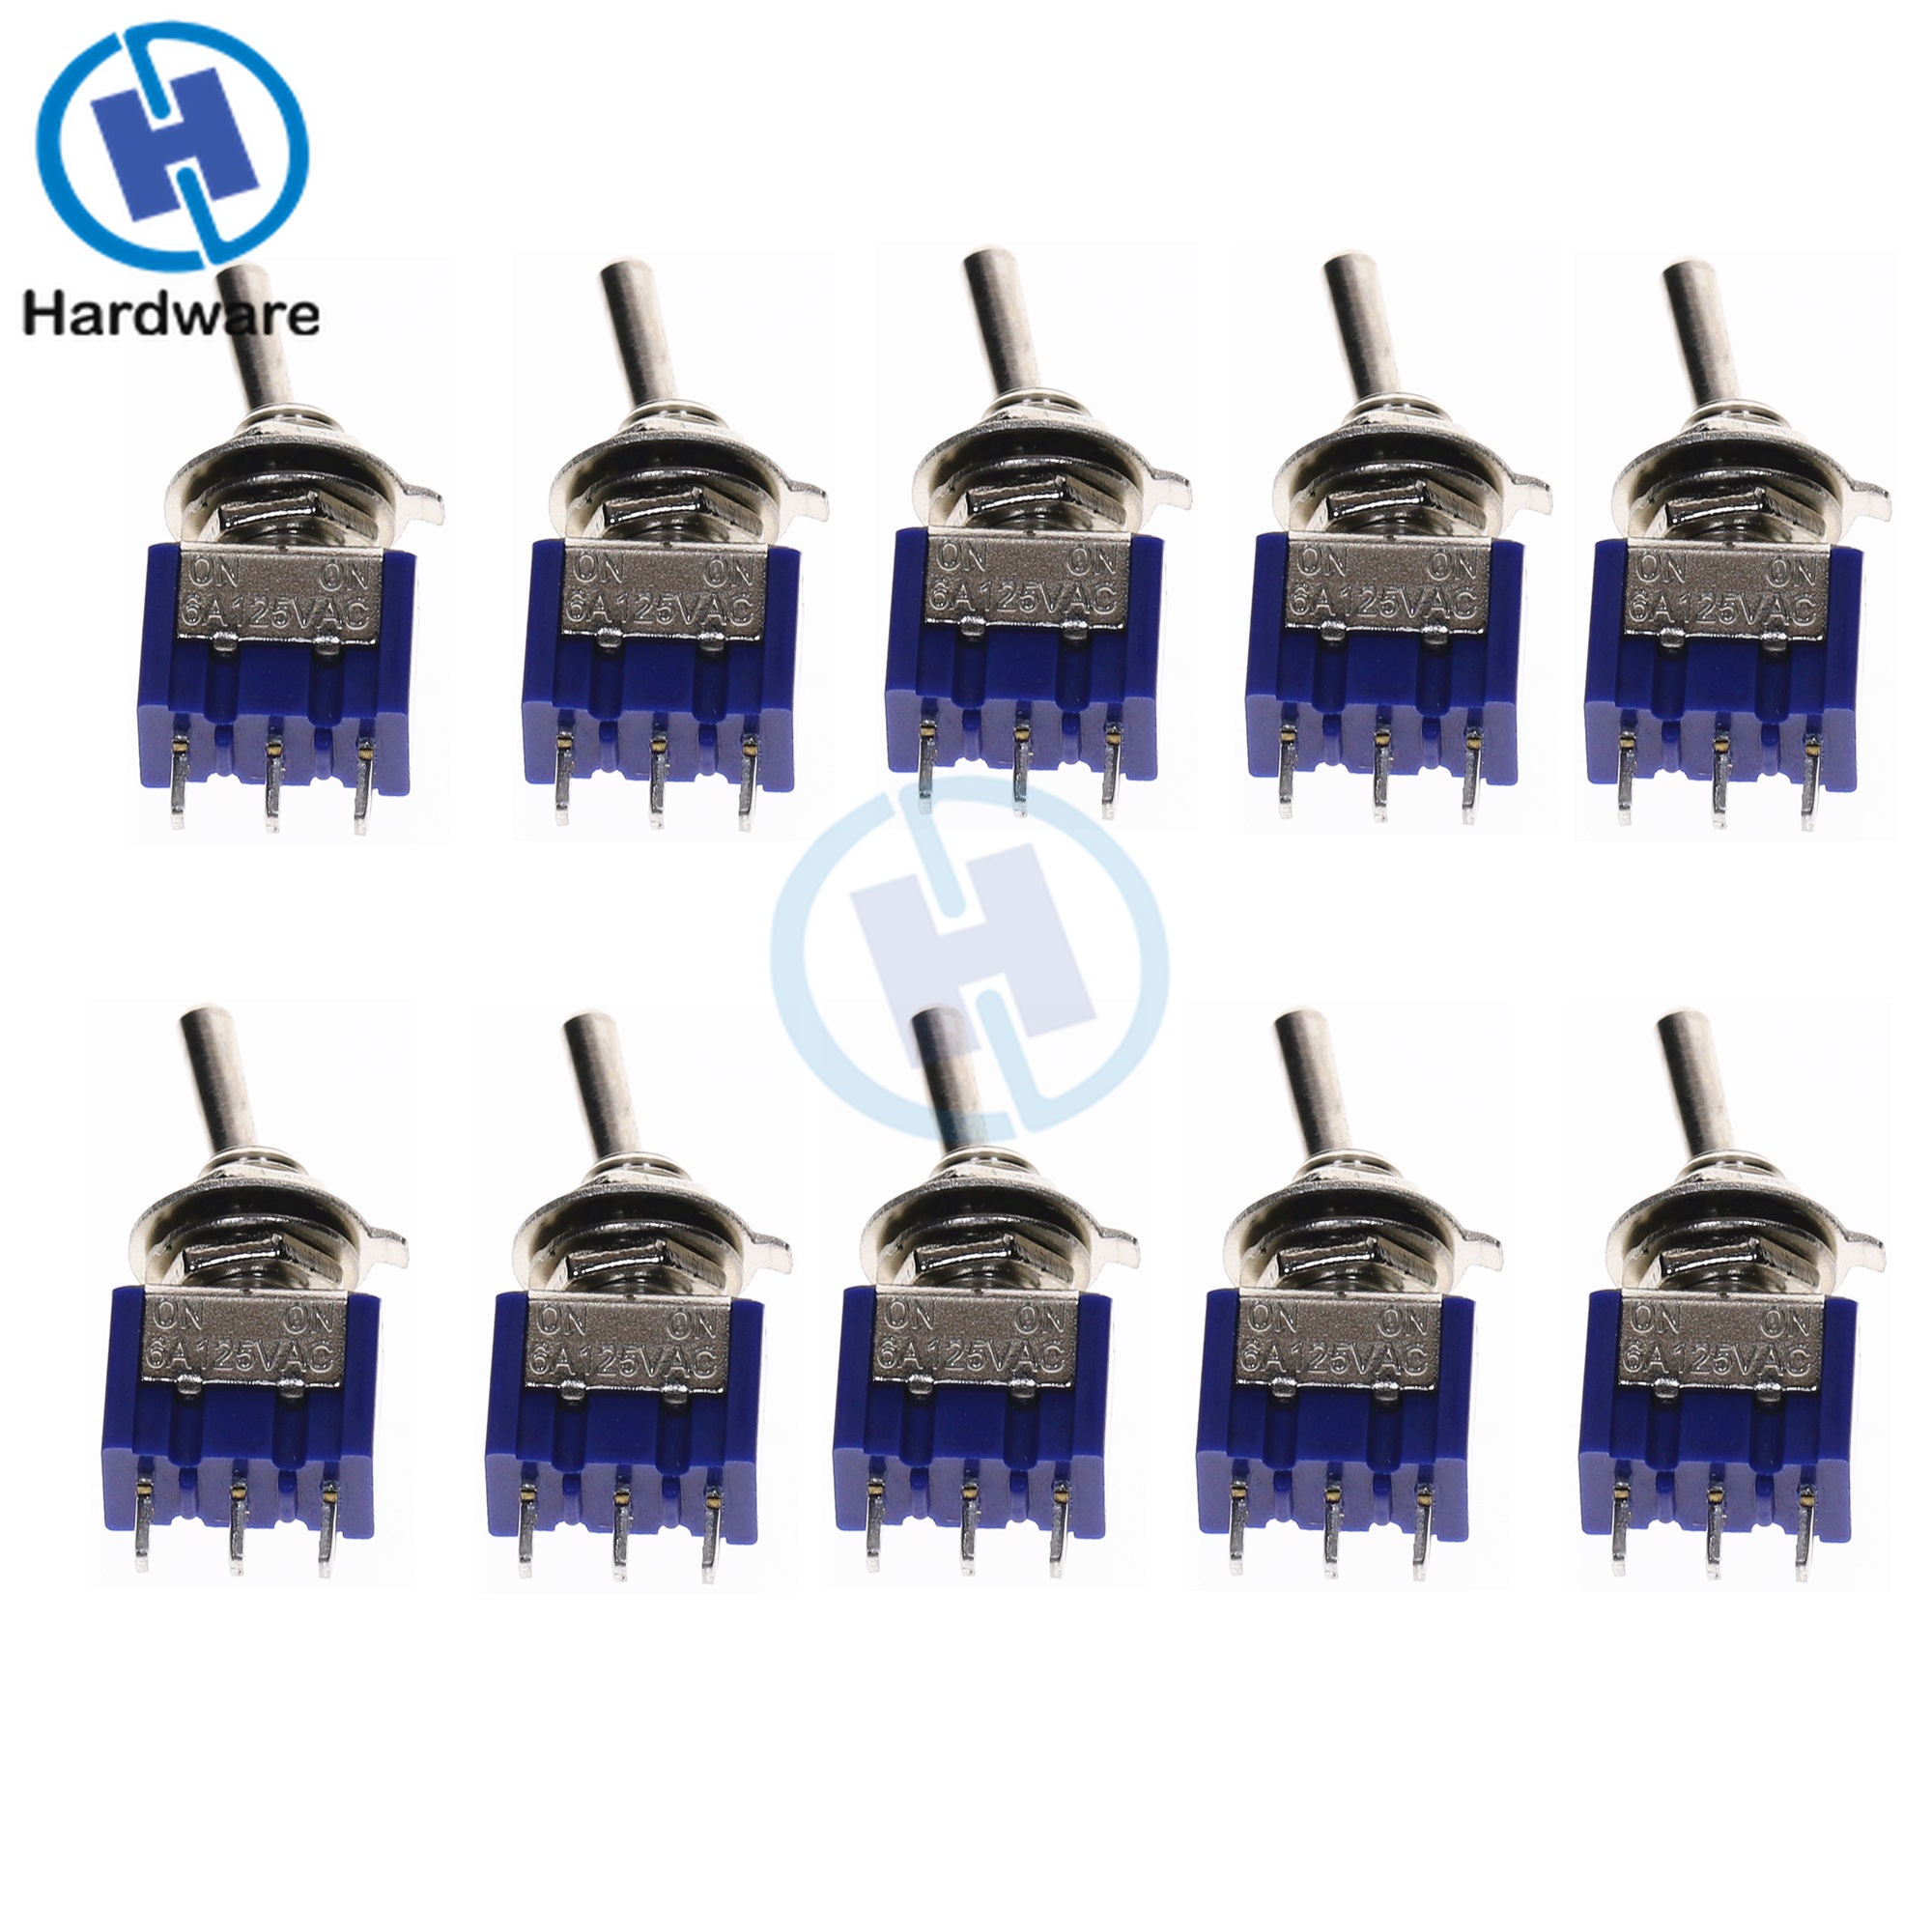 10PC/5PC Miniature Toggle Switch Single Pole Double Throw SPDT (MTS102) ON-ON 120VAC 6A 1/4 Inch Mounting MTS-102